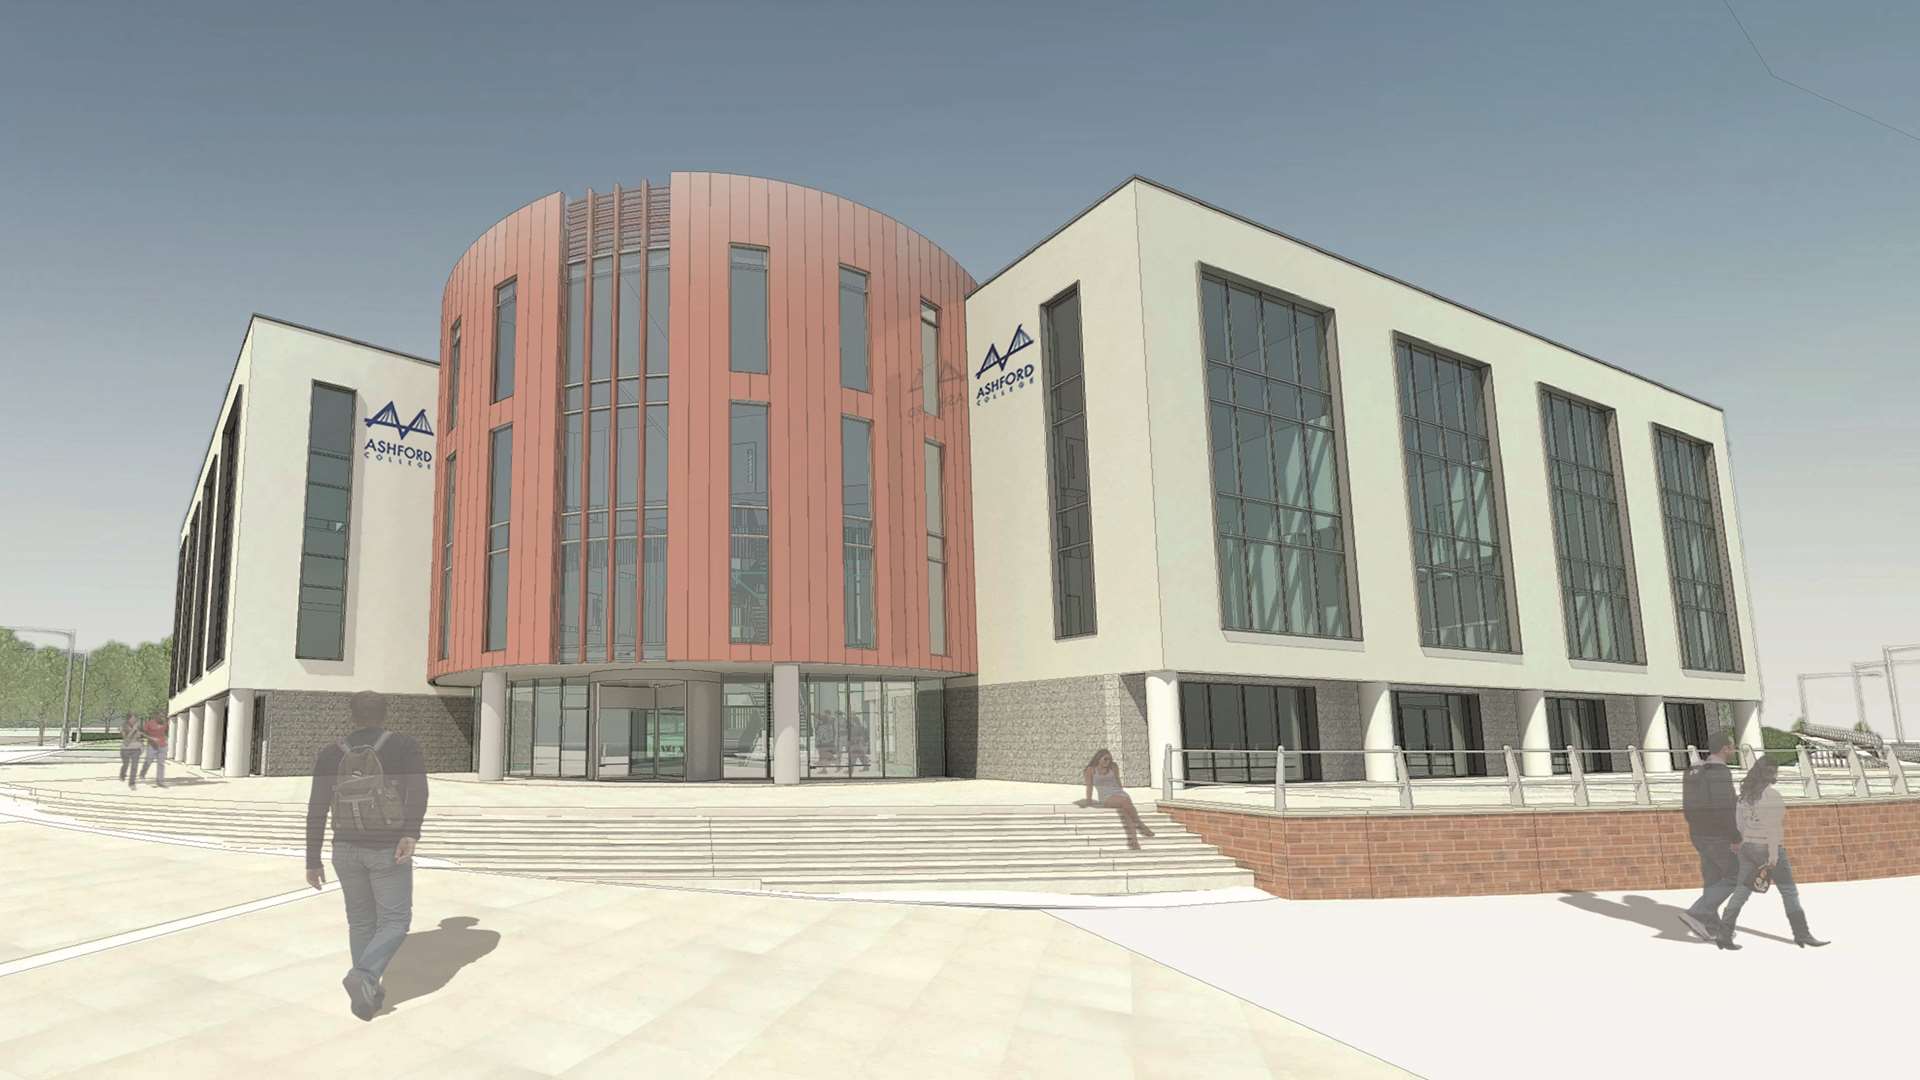 An artist's impression of the future Ashford College